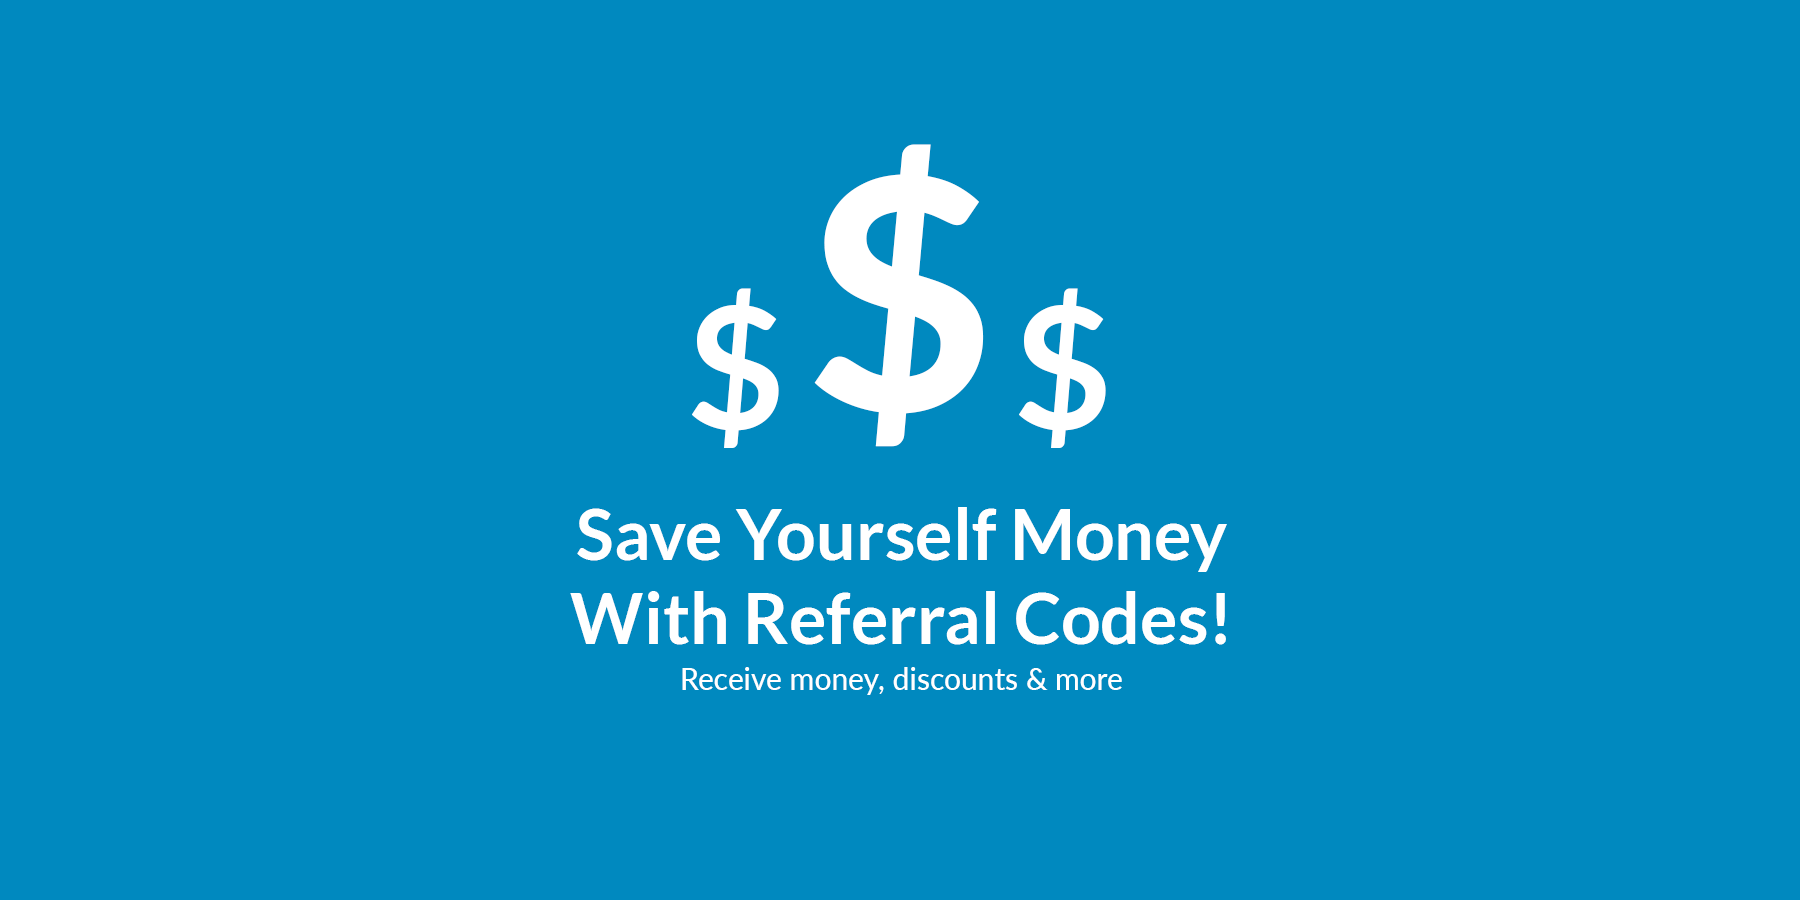 Referral Codes